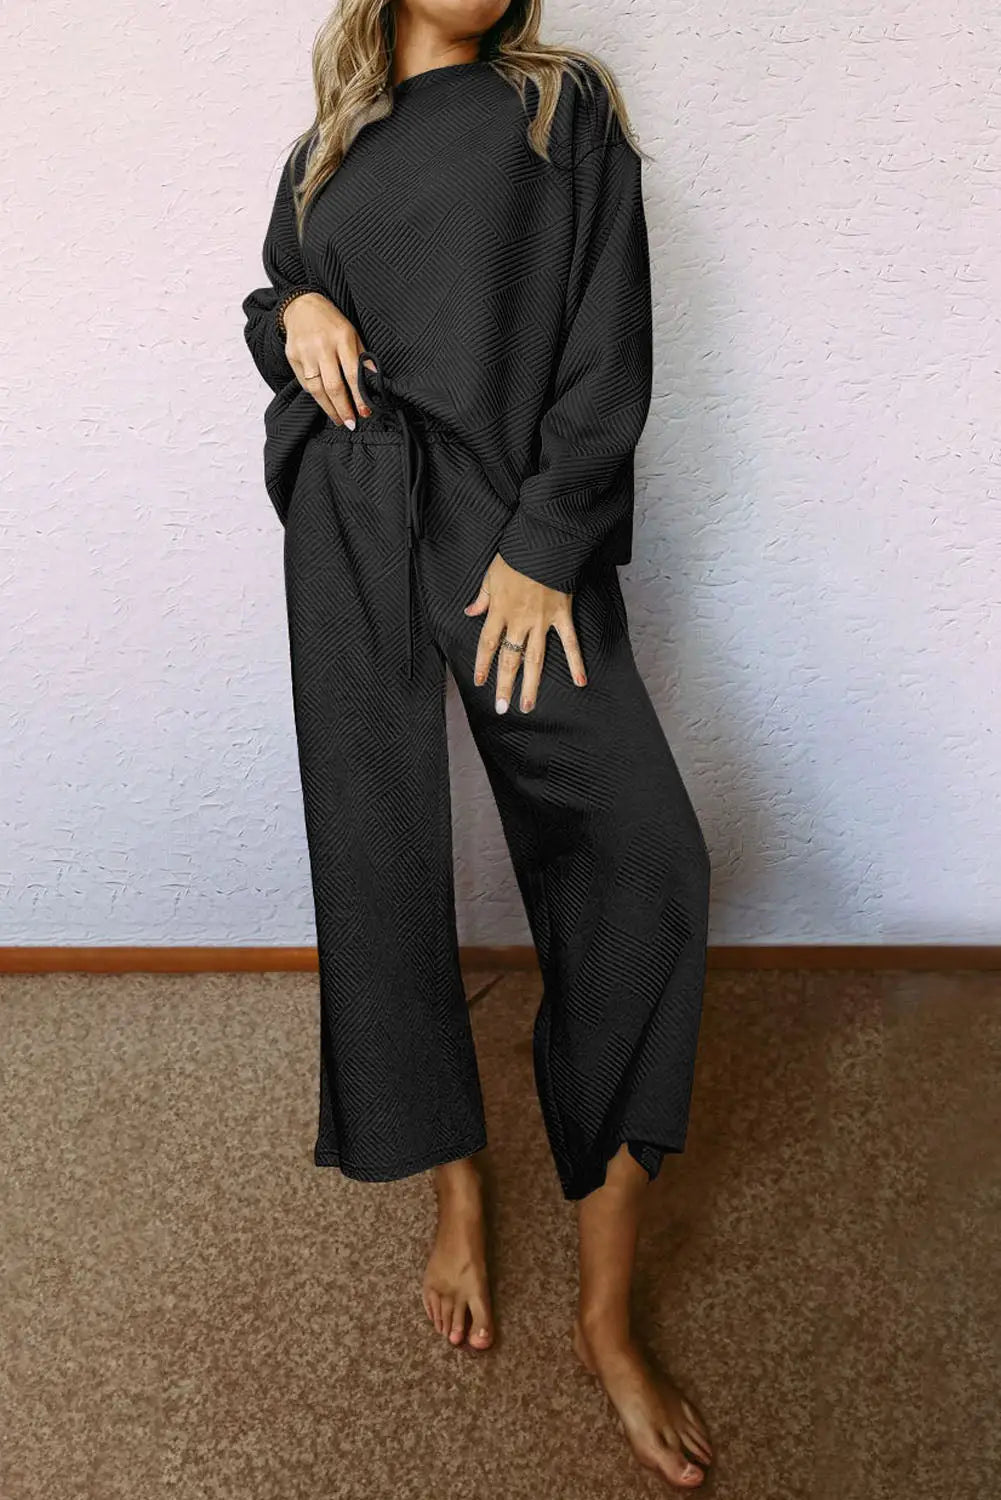 Black ultra loose textured 2pcs slouchy outfit - 2xl / 95% polyester + 5% elastane - pants sets